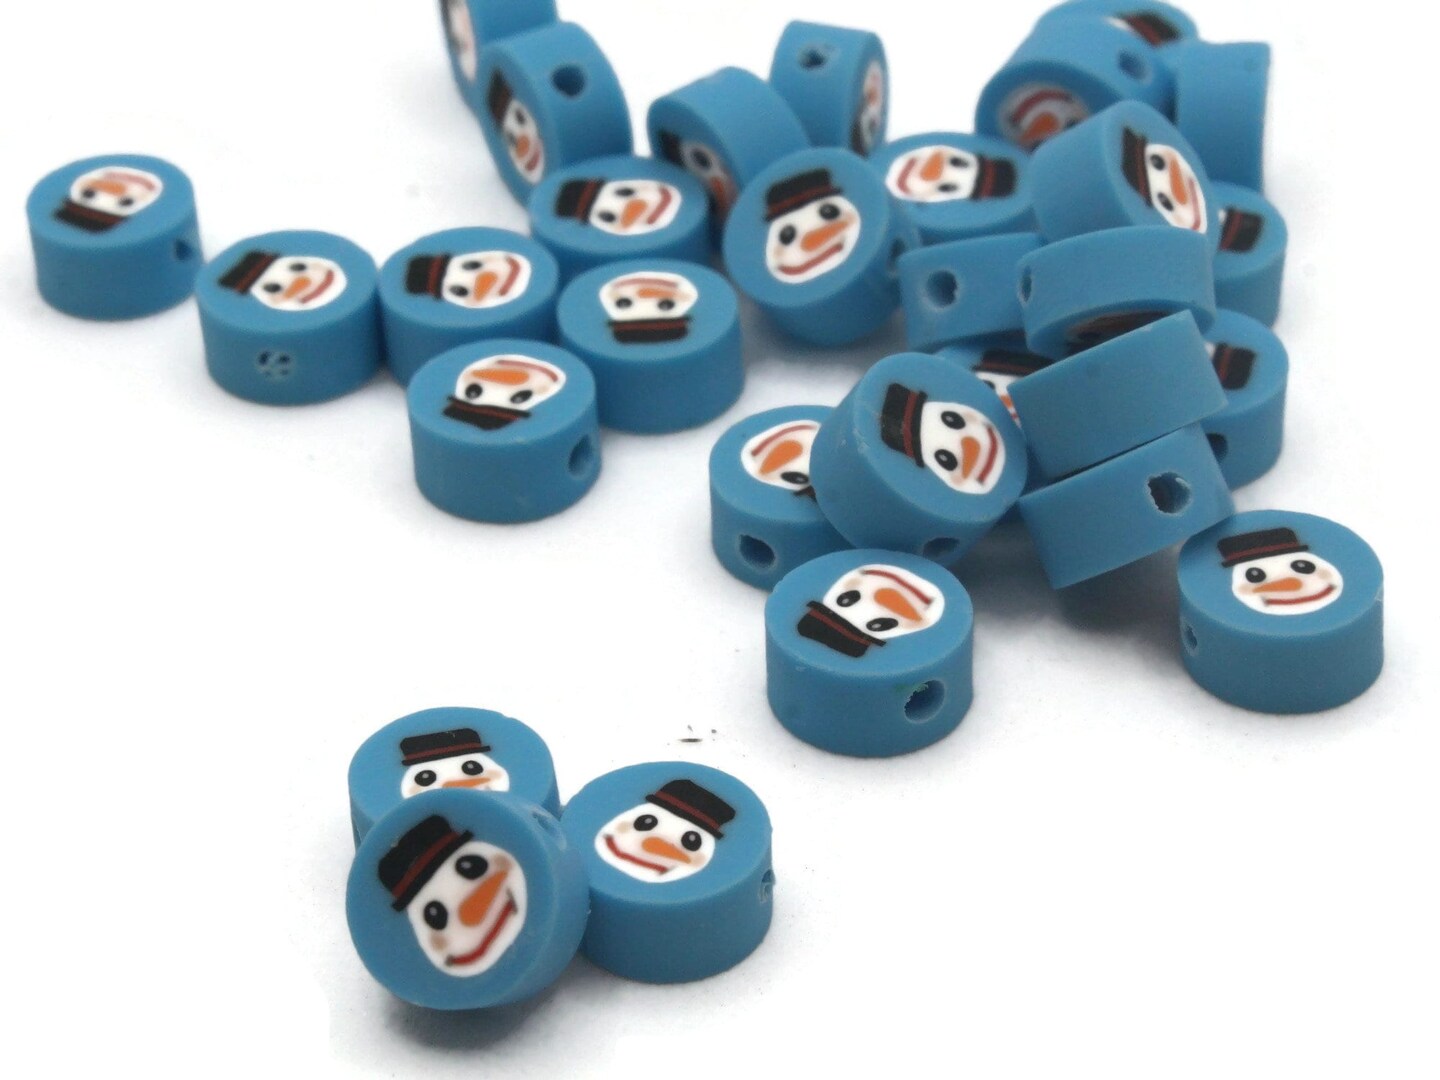 30 Snowman Polymer Clay Sky Blue and White Christmas Beads